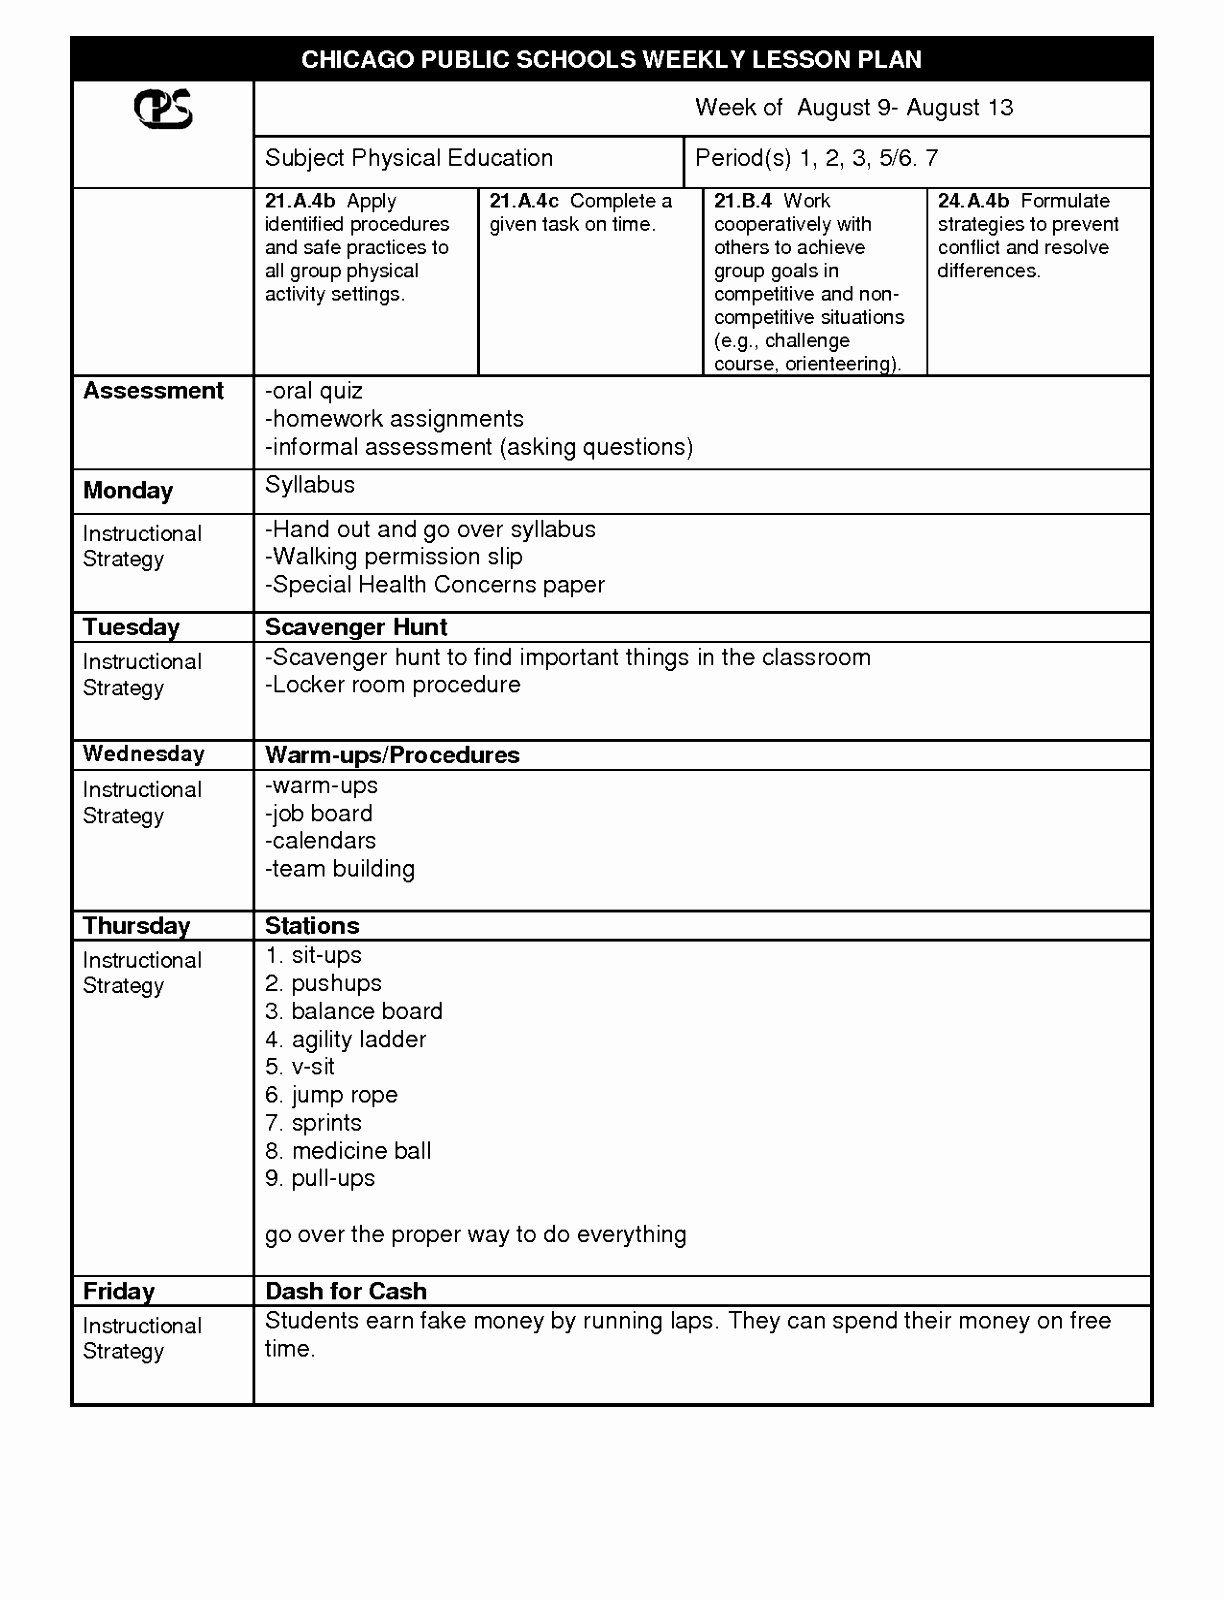 Best Lesson Plan Template Elegant 10 Lesson Plan Template for Physical Education Eipot